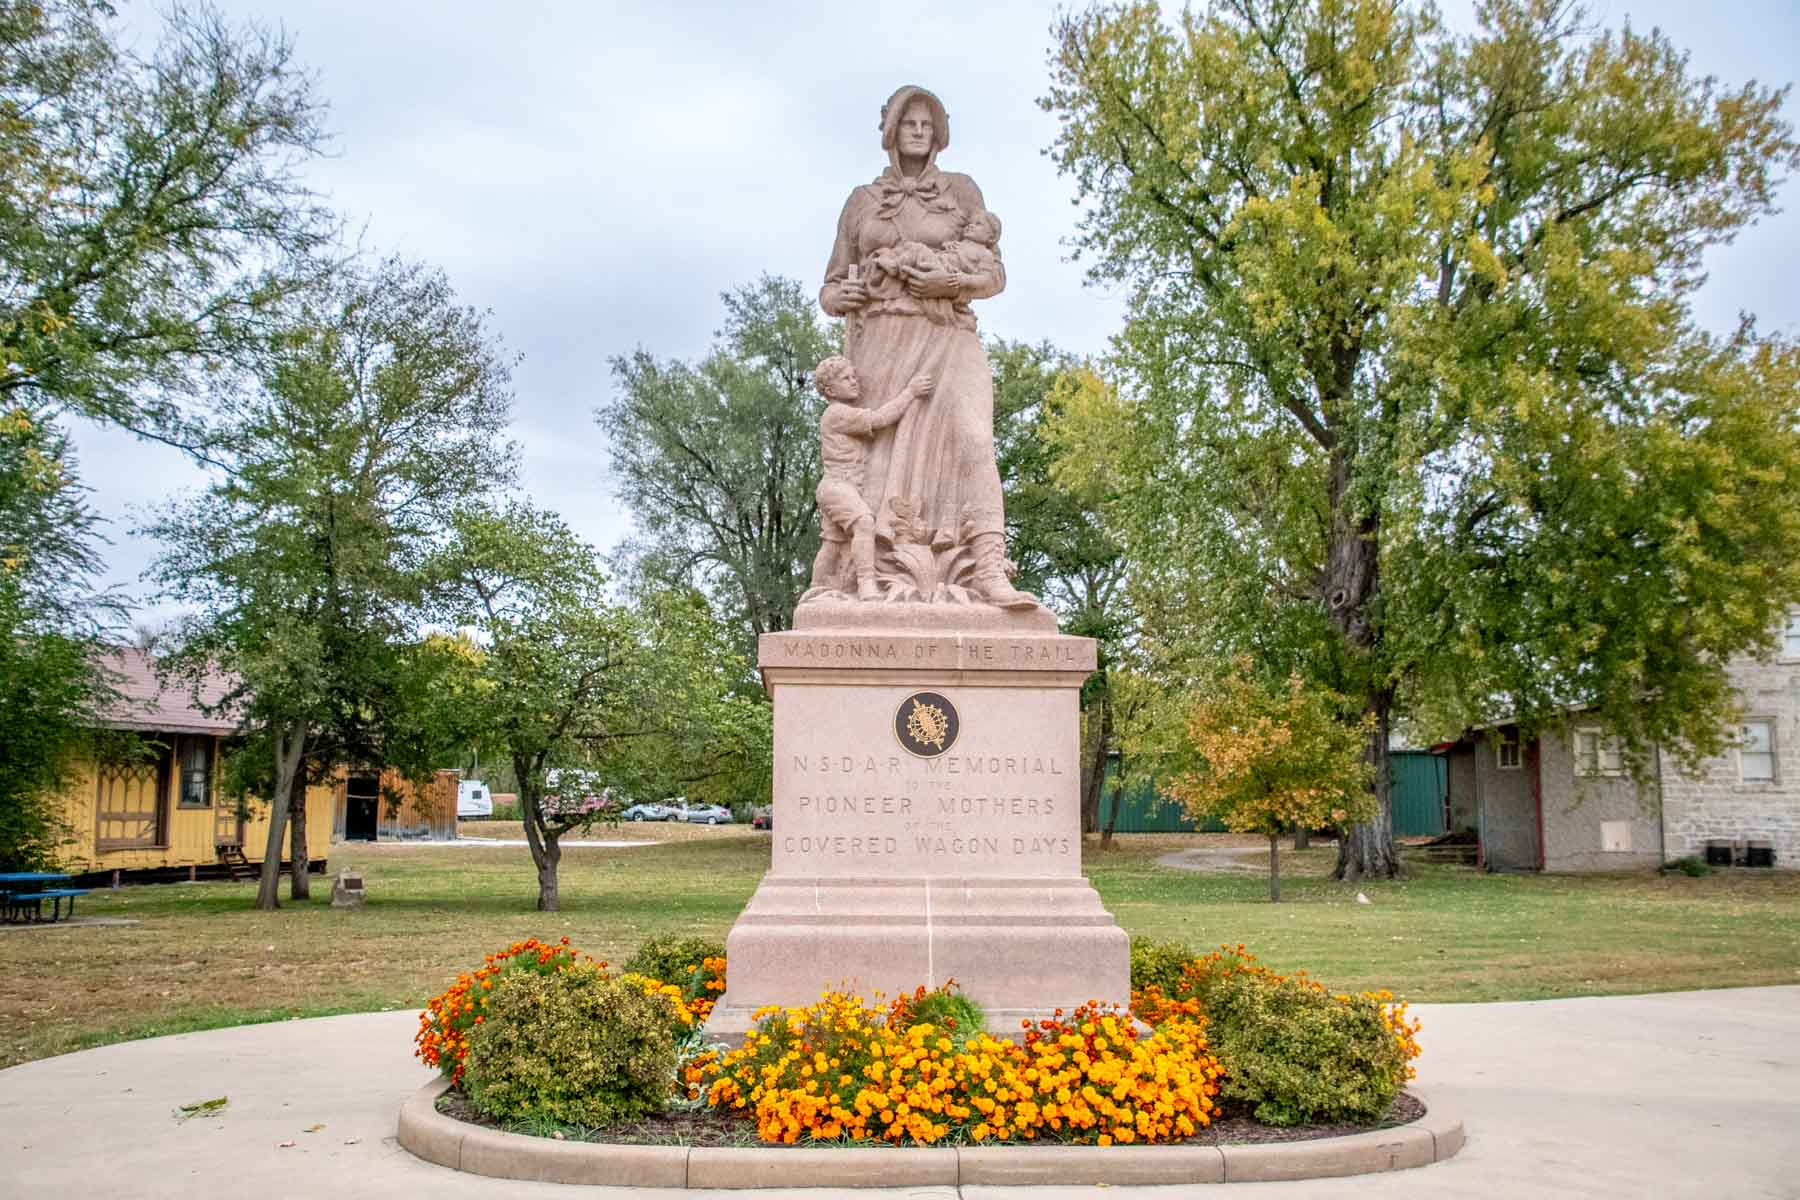 Statue of  woman with two children reading "Madonna of the Trail" and "NSDAR Memorial Pioneer Mothers Covered Wagon Days"